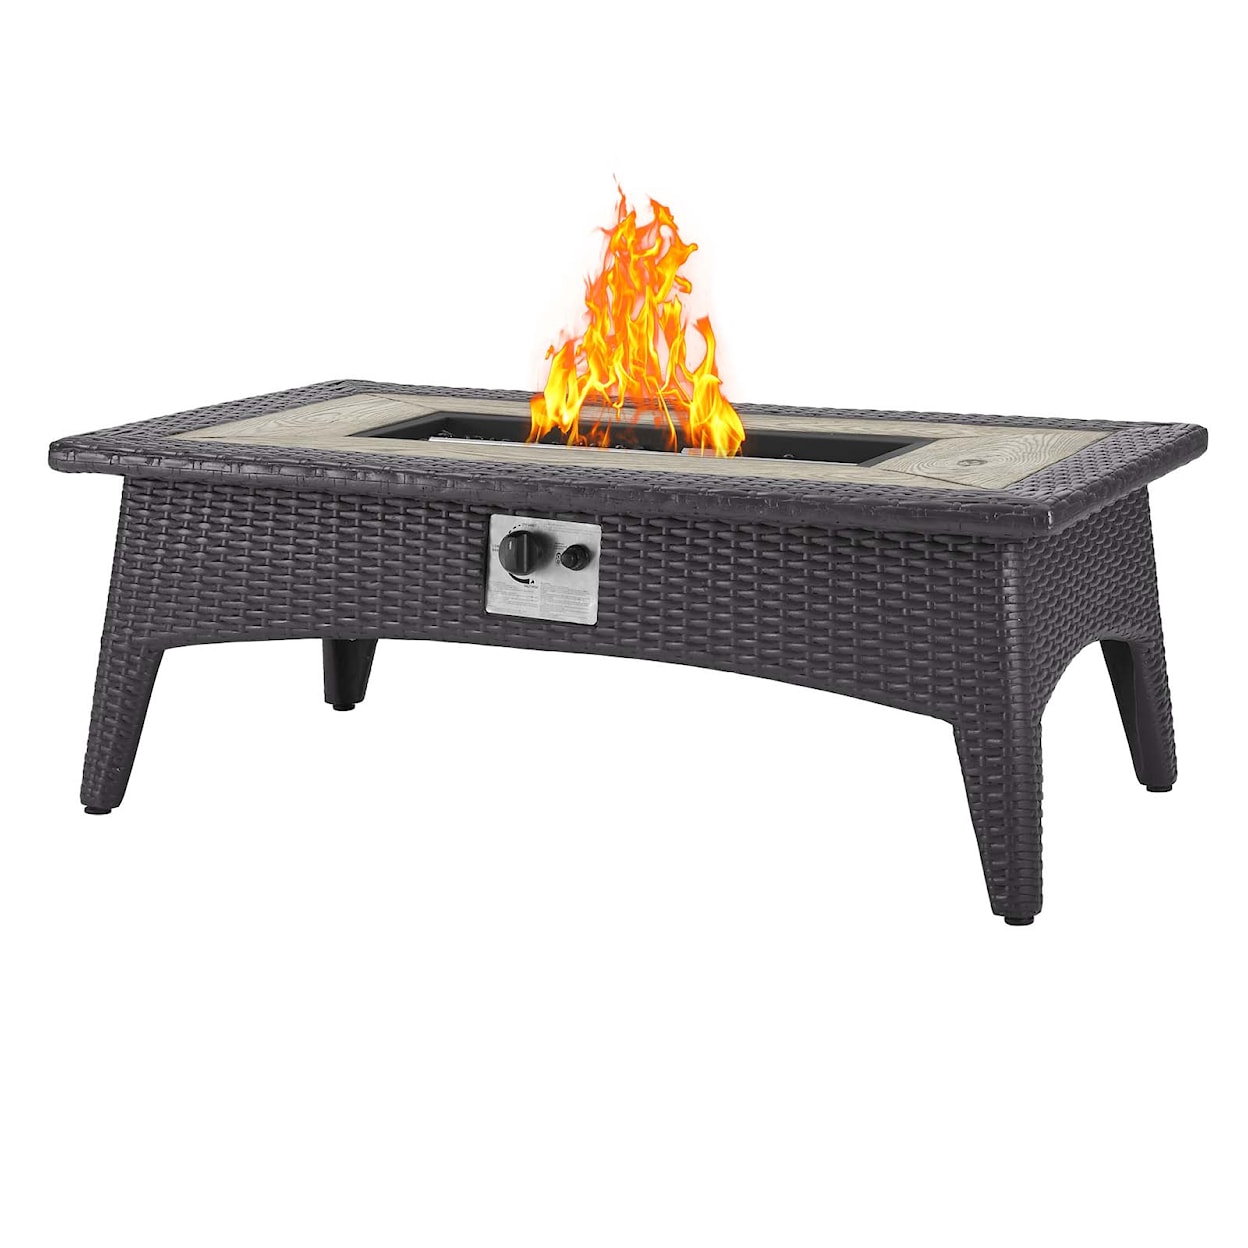 Modway Convene Outdoor 4 Piece with Fire Pit